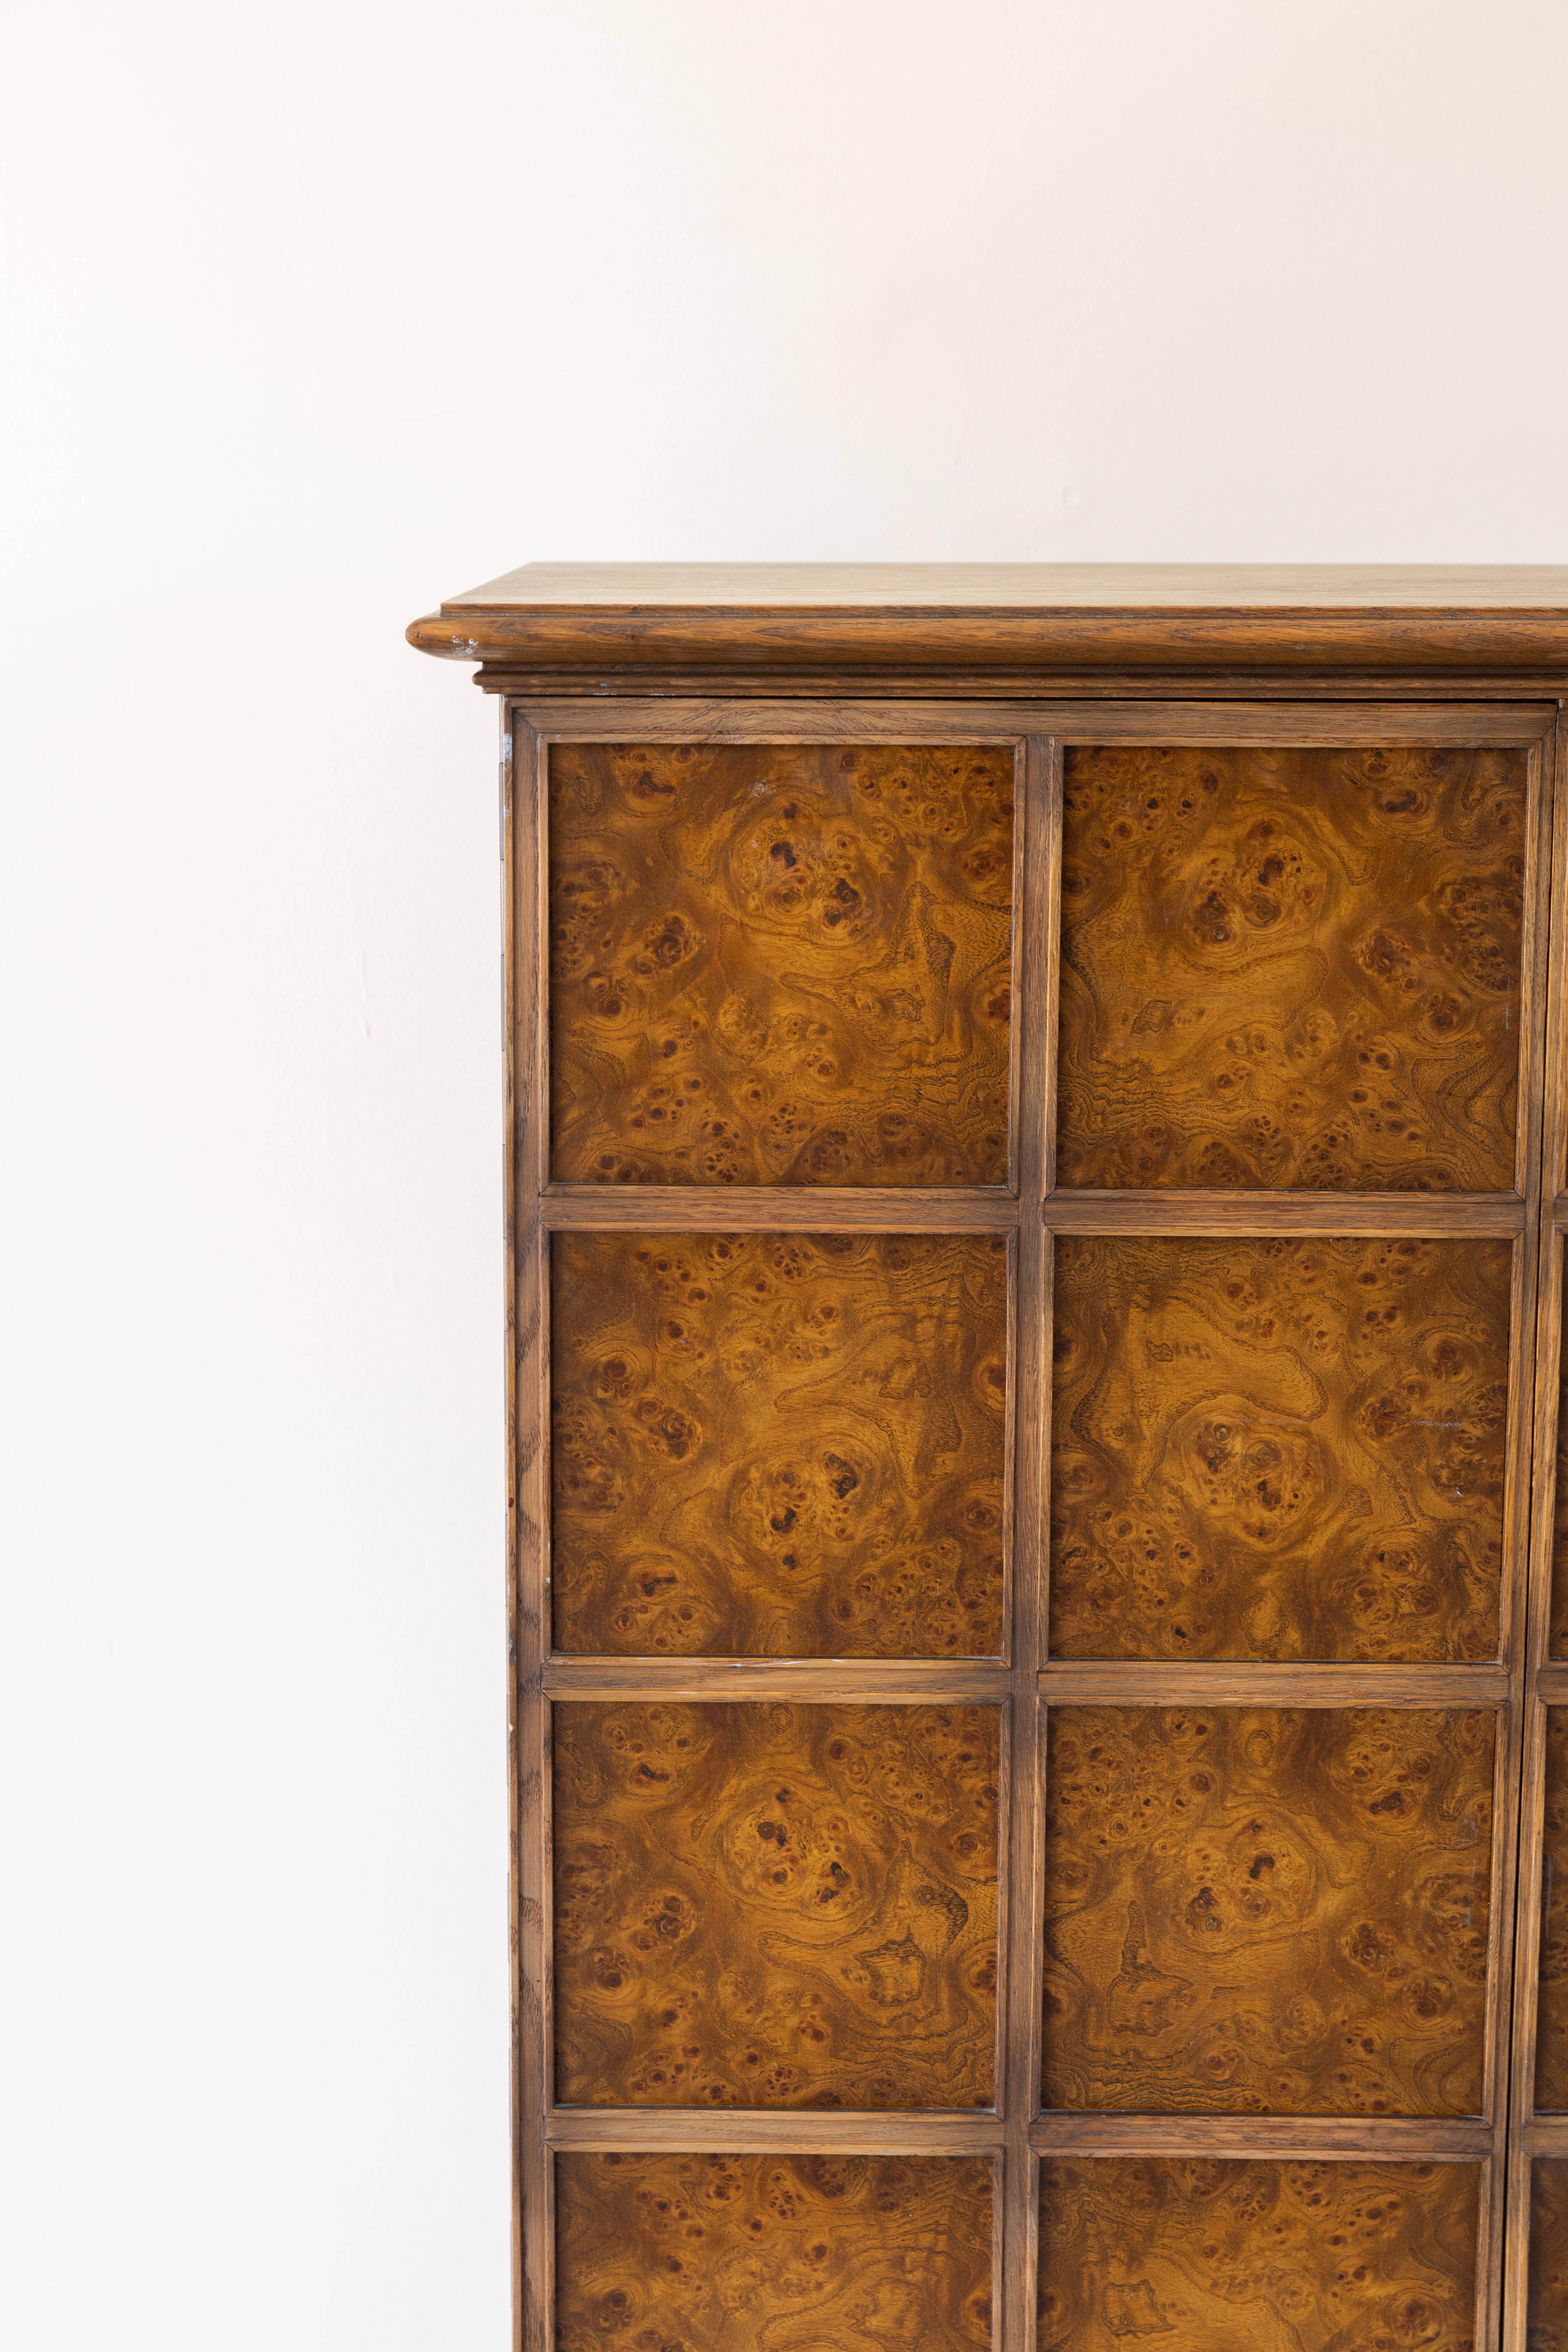 Modern Swedish cabinet Baroque style from 1947. Lovely sctructure on the cabinets front, finished on curved legs.

Note: Cabinet is photoed without the key, but key is available.